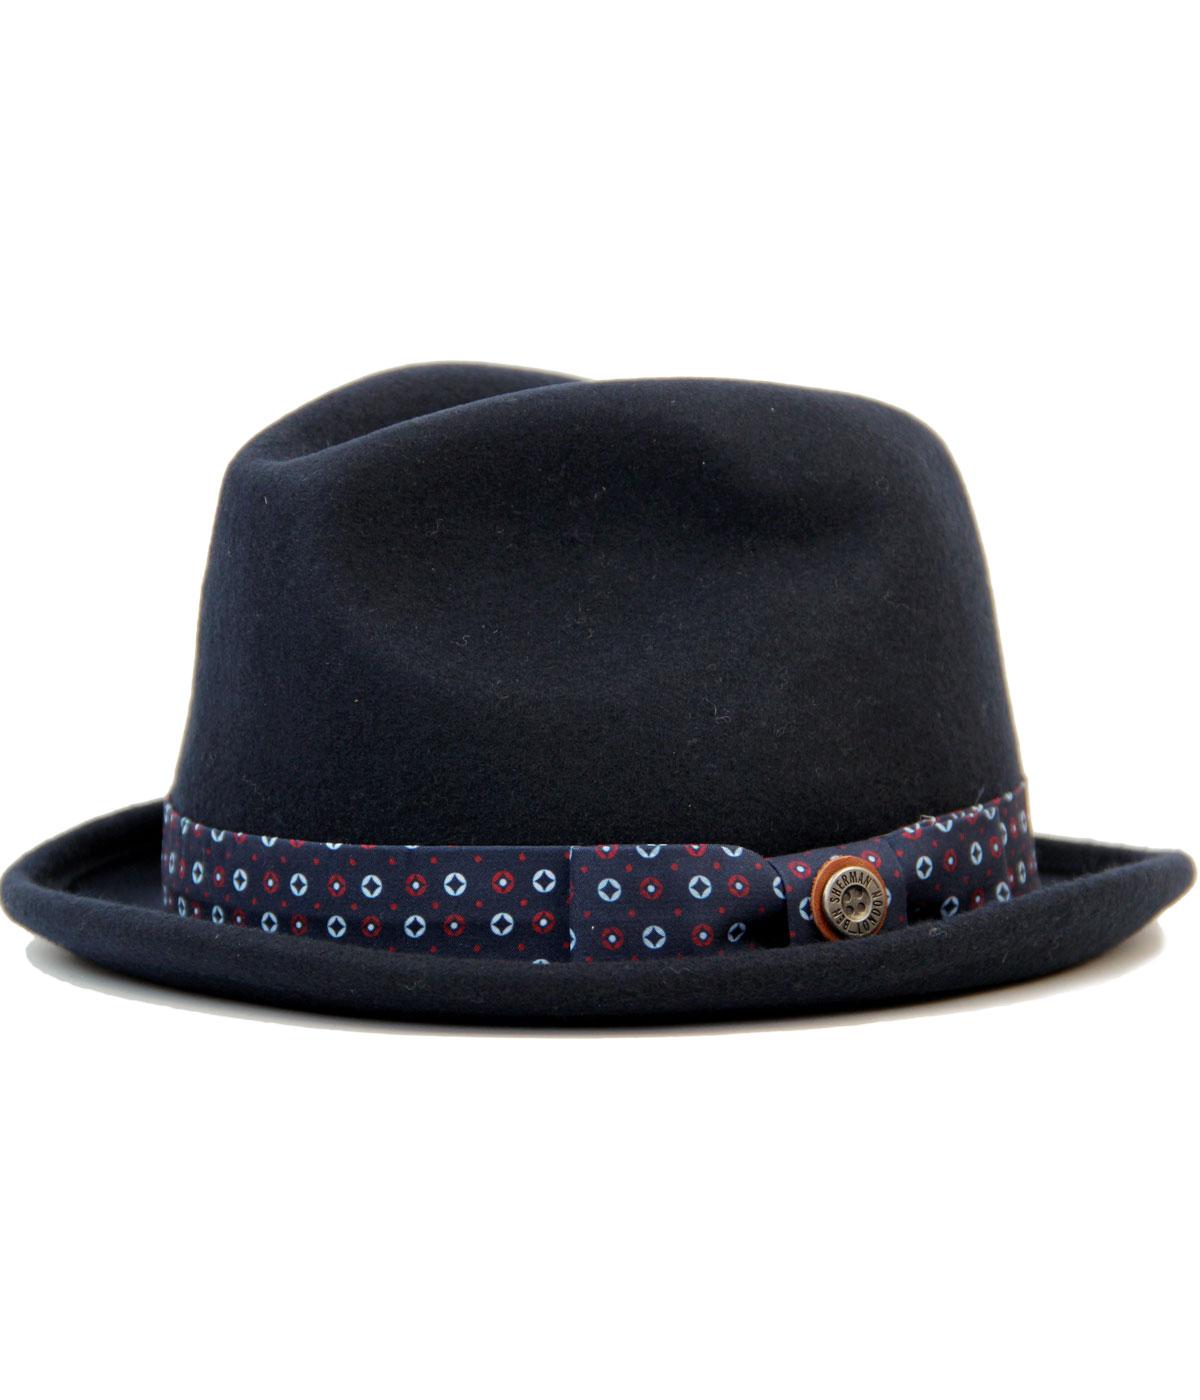 BEN SHERMAN 60s Mod Trilby Hat with Geo Print Band